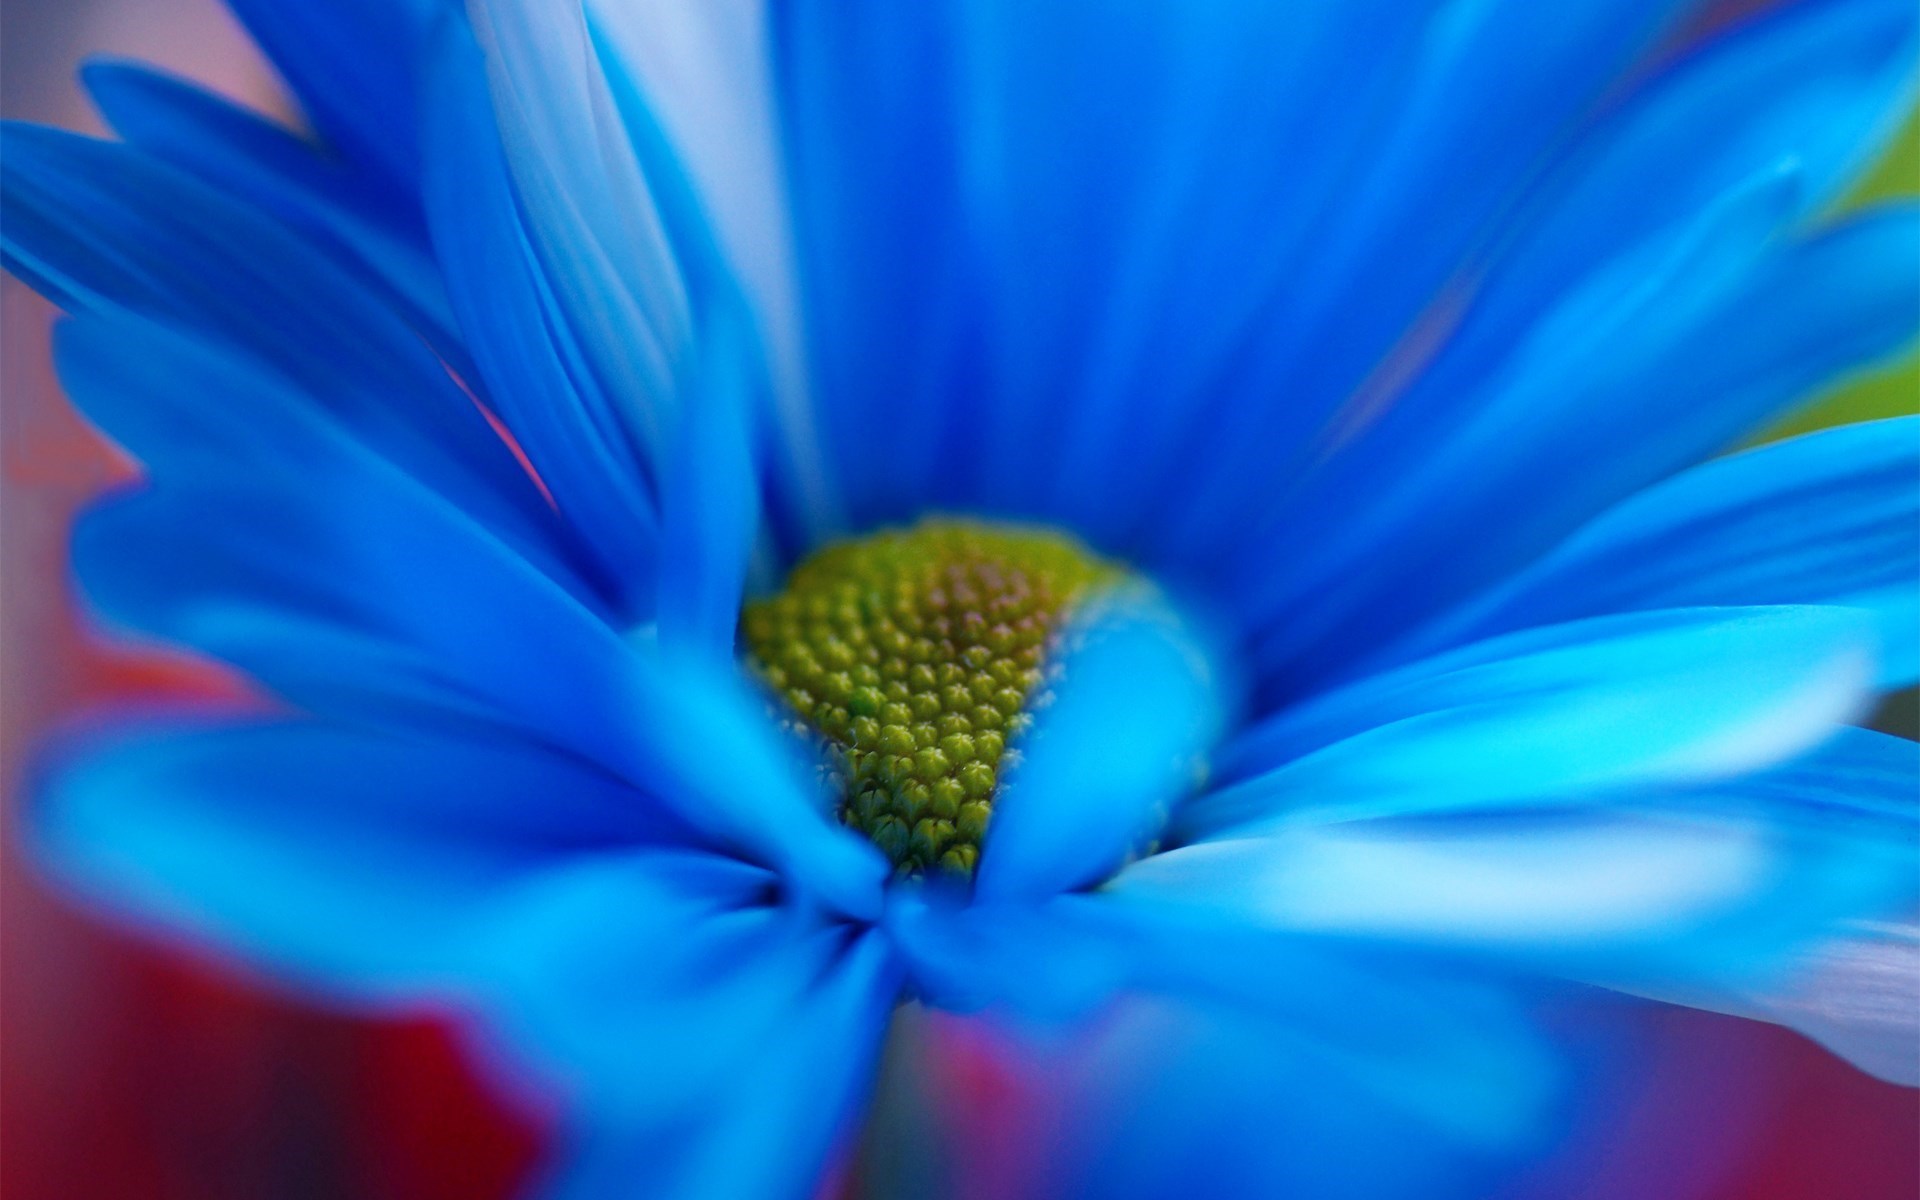 Hd Flower Chamomile Blue Close Up Wallpaper Car Pictures | bathroom ...